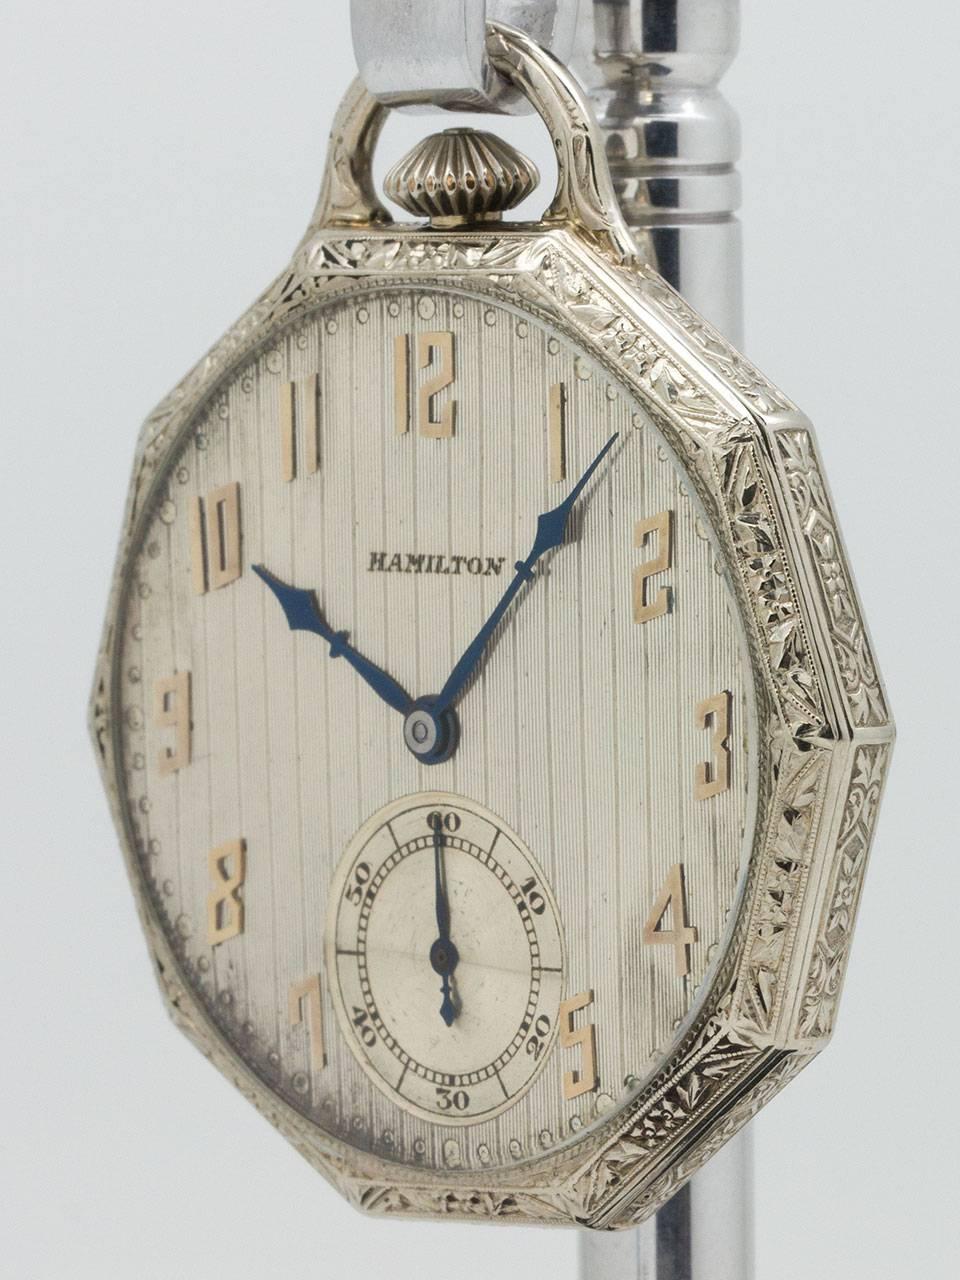 Hamilton 14K white gold open face dress pocket watch circa 1929. Featuring a man’s 12 size 45mm diameter 10 sided case with deeply engraved detailing. Original matte silver dial with pin stripe, tapestry pattern and with gold applied art deco style